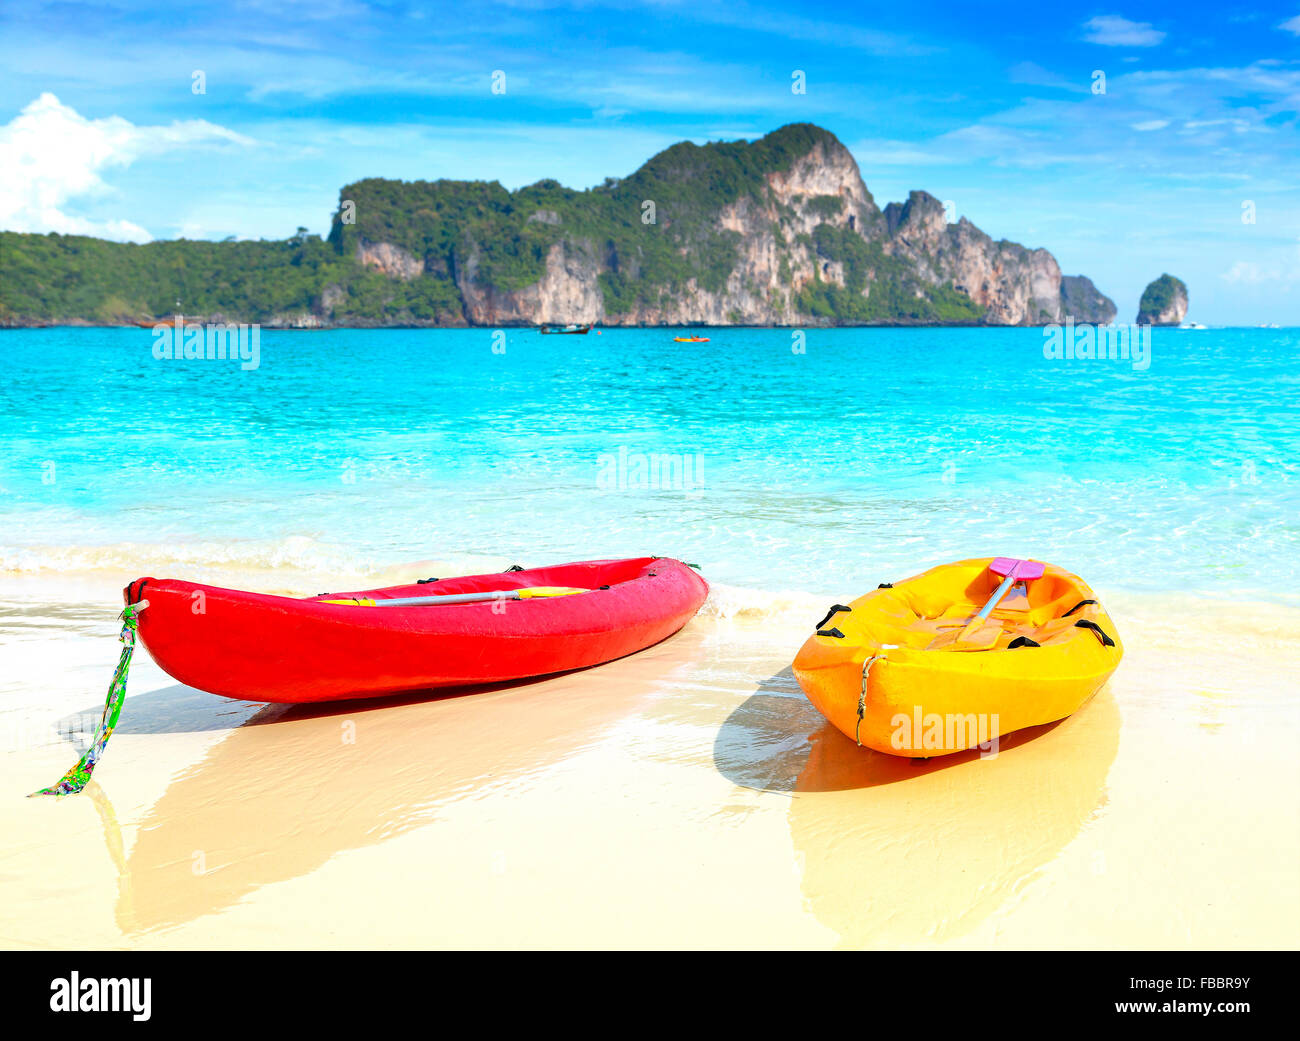 Two kayaks on a tropical beach, shallow depth of field, summer holidays background. Stock Photo